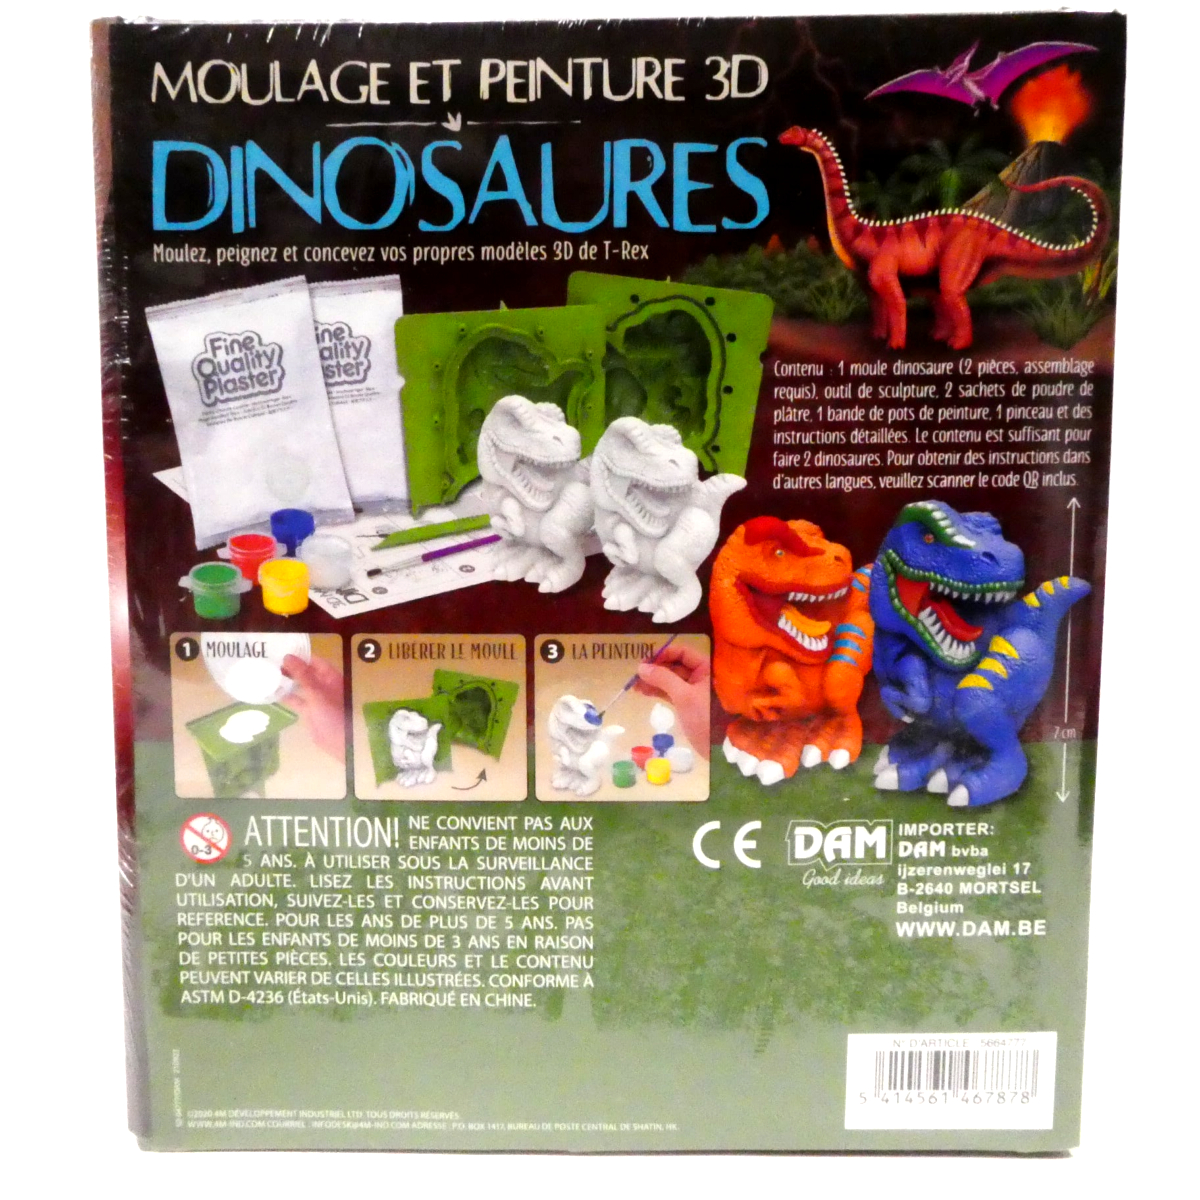 moulage-dinosaure-2-zoom